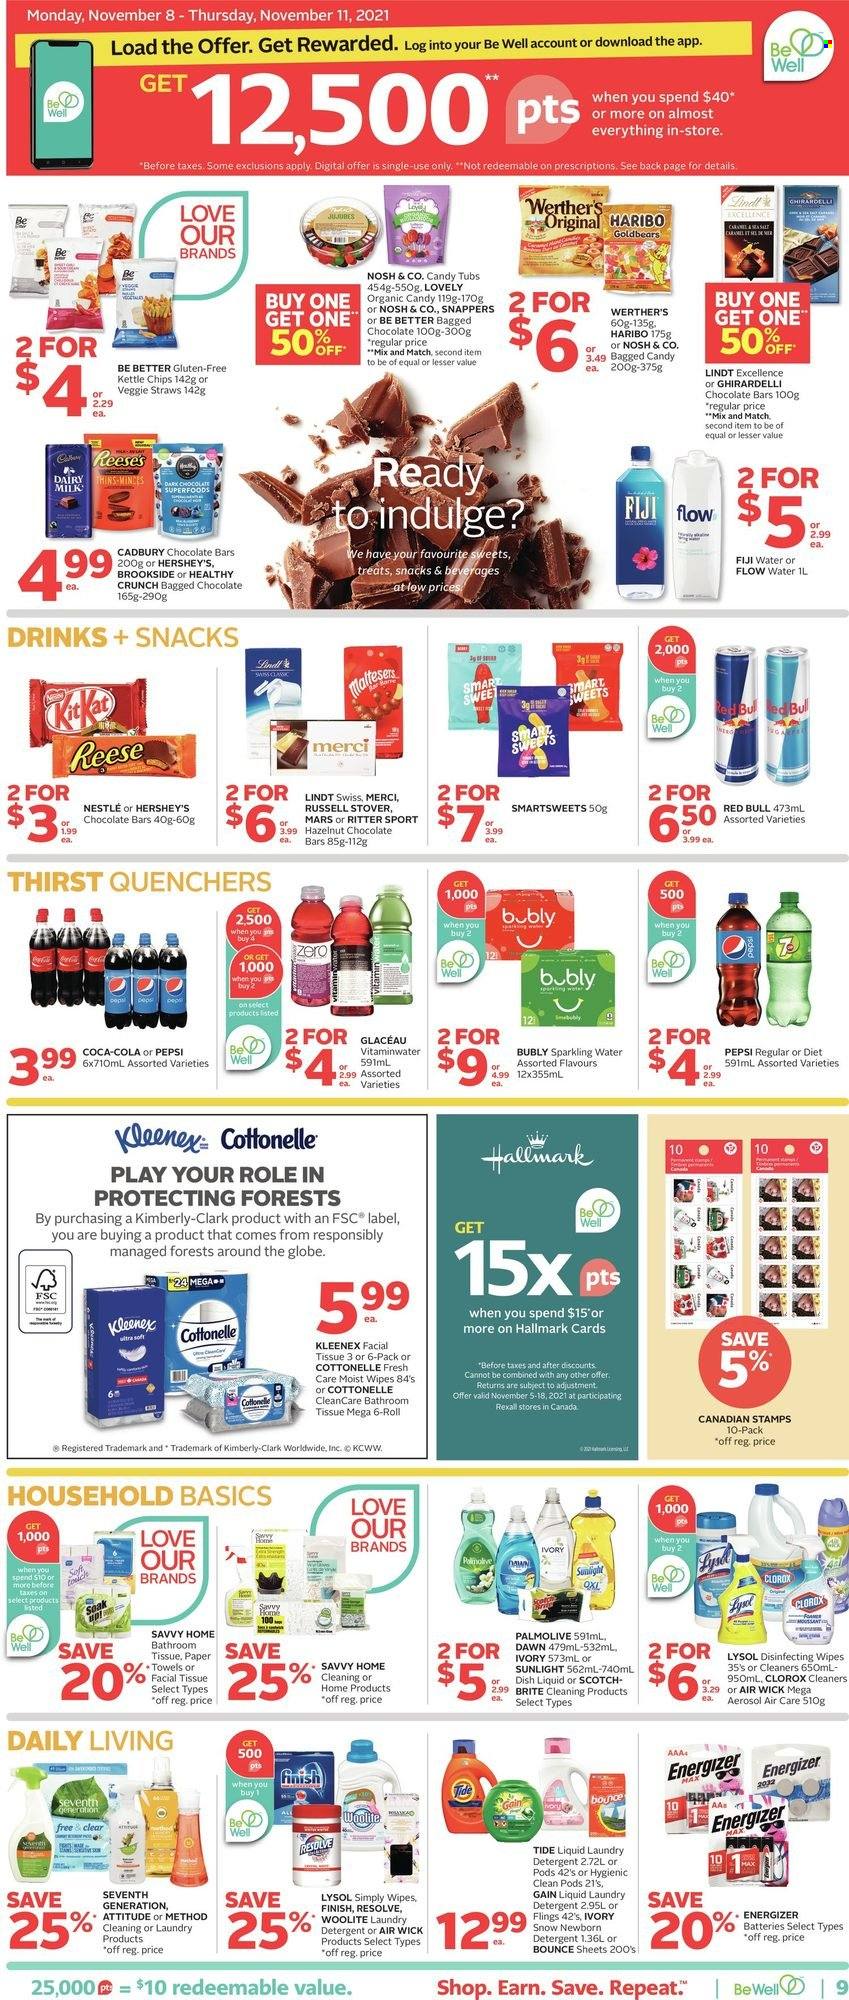 thumbnail - Rexall Flyer - November 05, 2021 - November 18, 2021 - Sales products - snack, Haribo, Mars, Reese's, Hershey's, Cadbury, Merci, Dairy Milk, Ritter Sport, Ghirardelli, chocolate bar, Veggie Straws, Coca-Cola, Pepsi, Red Bull, flavored water, sparkling water, wipes, bath tissue, Cottonelle, Kleenex, kitchen towels, paper towels, Gain, Lysol, Clorox, Woolite, Tide, laundry detergent, Sunlight, Bounce, dishwashing liquid, Palmolive, Brite, Air Wick, Nestlé, detergent, Energizer, chips, Lindt. Page 10.